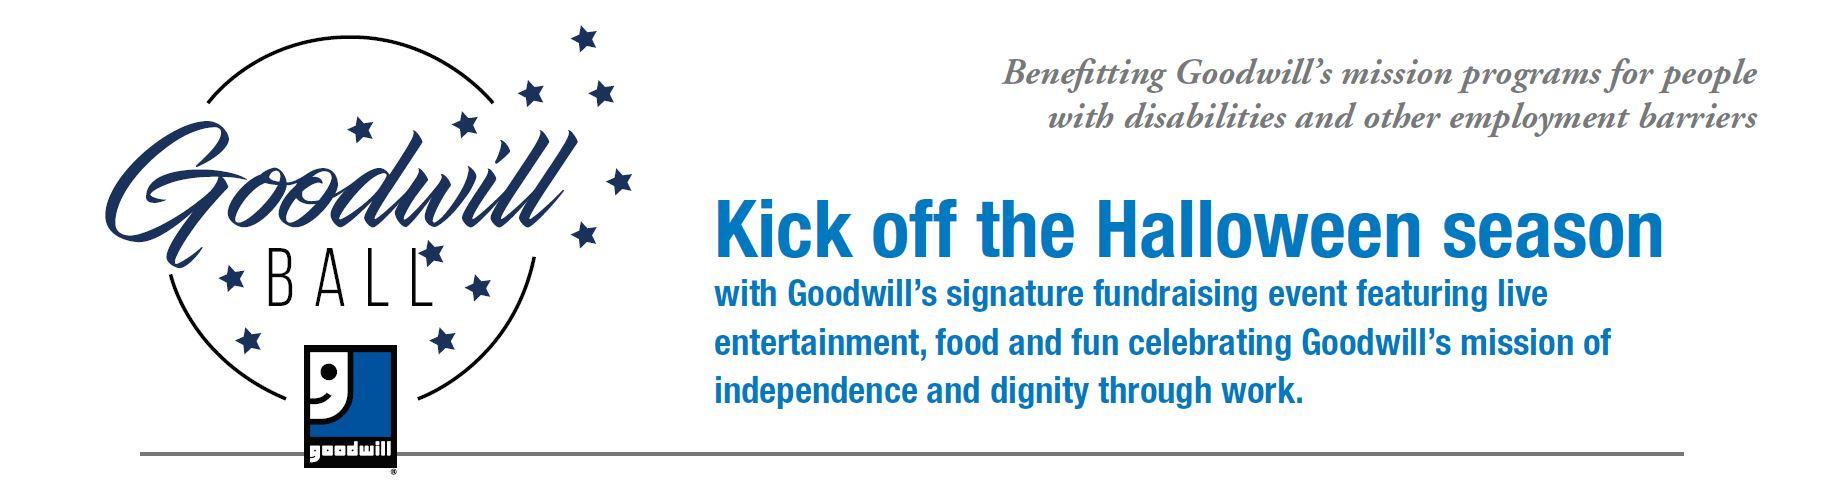 Benefitting Goodwill’s mission programs for people with disabilities and other employment barriers